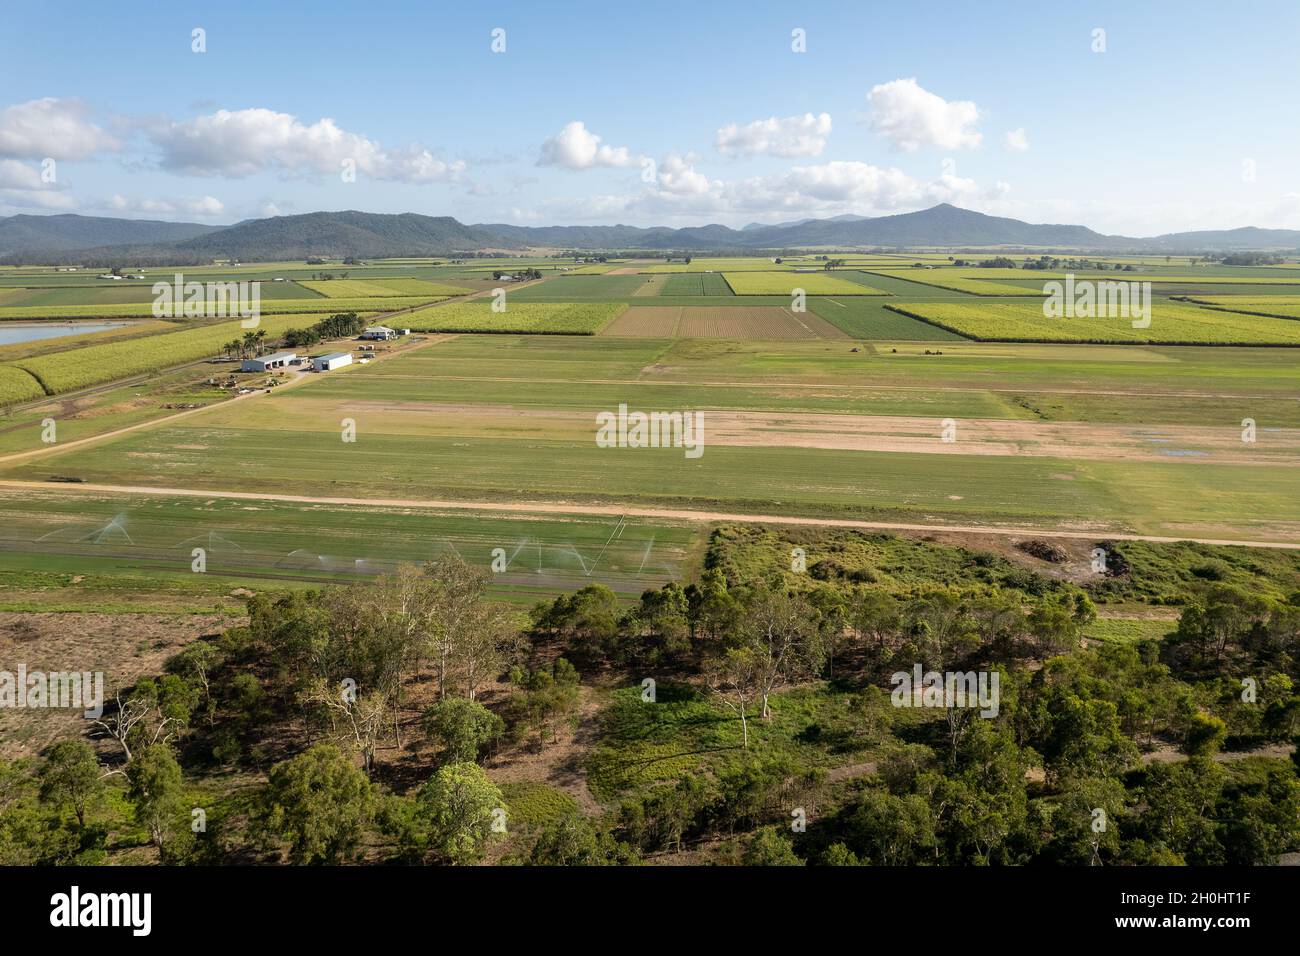 A farm growing lawn for sale for home backyards with bush on one side and sugarcane fields on the other Stock Photo